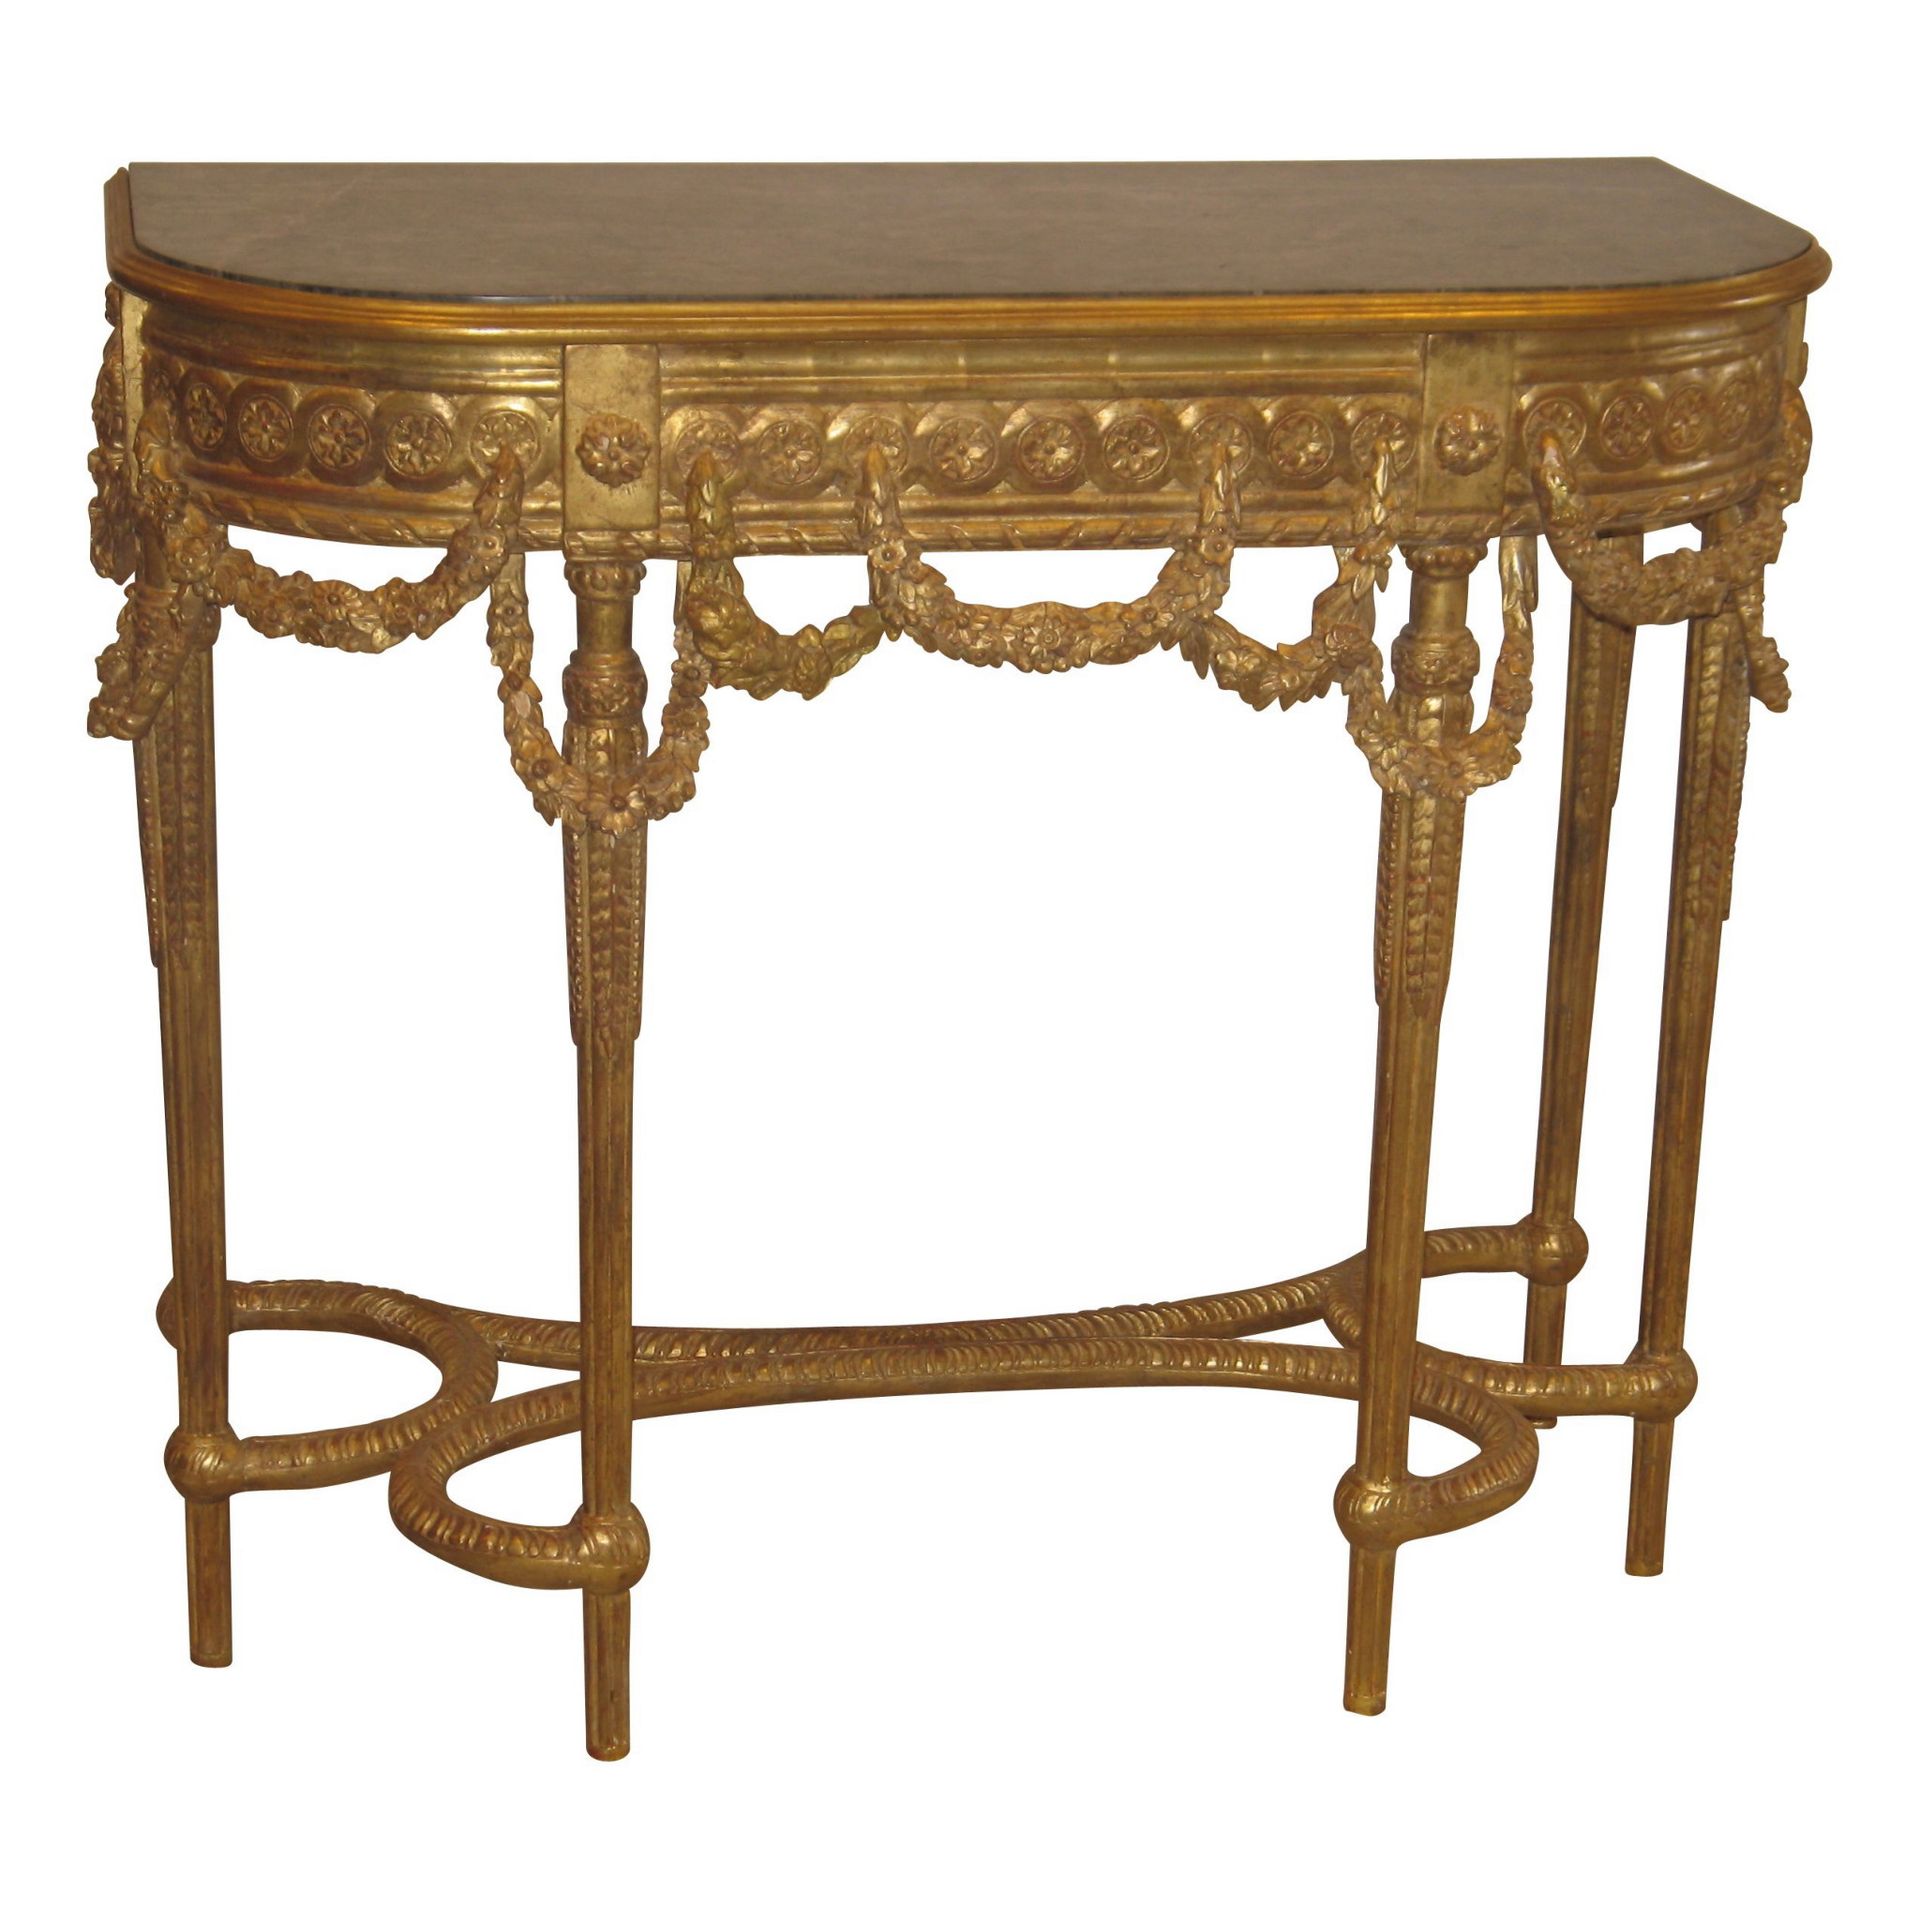 Null Console Louis XVI carved and gilded with gray marble top.

Dimensions: L101&hellip;